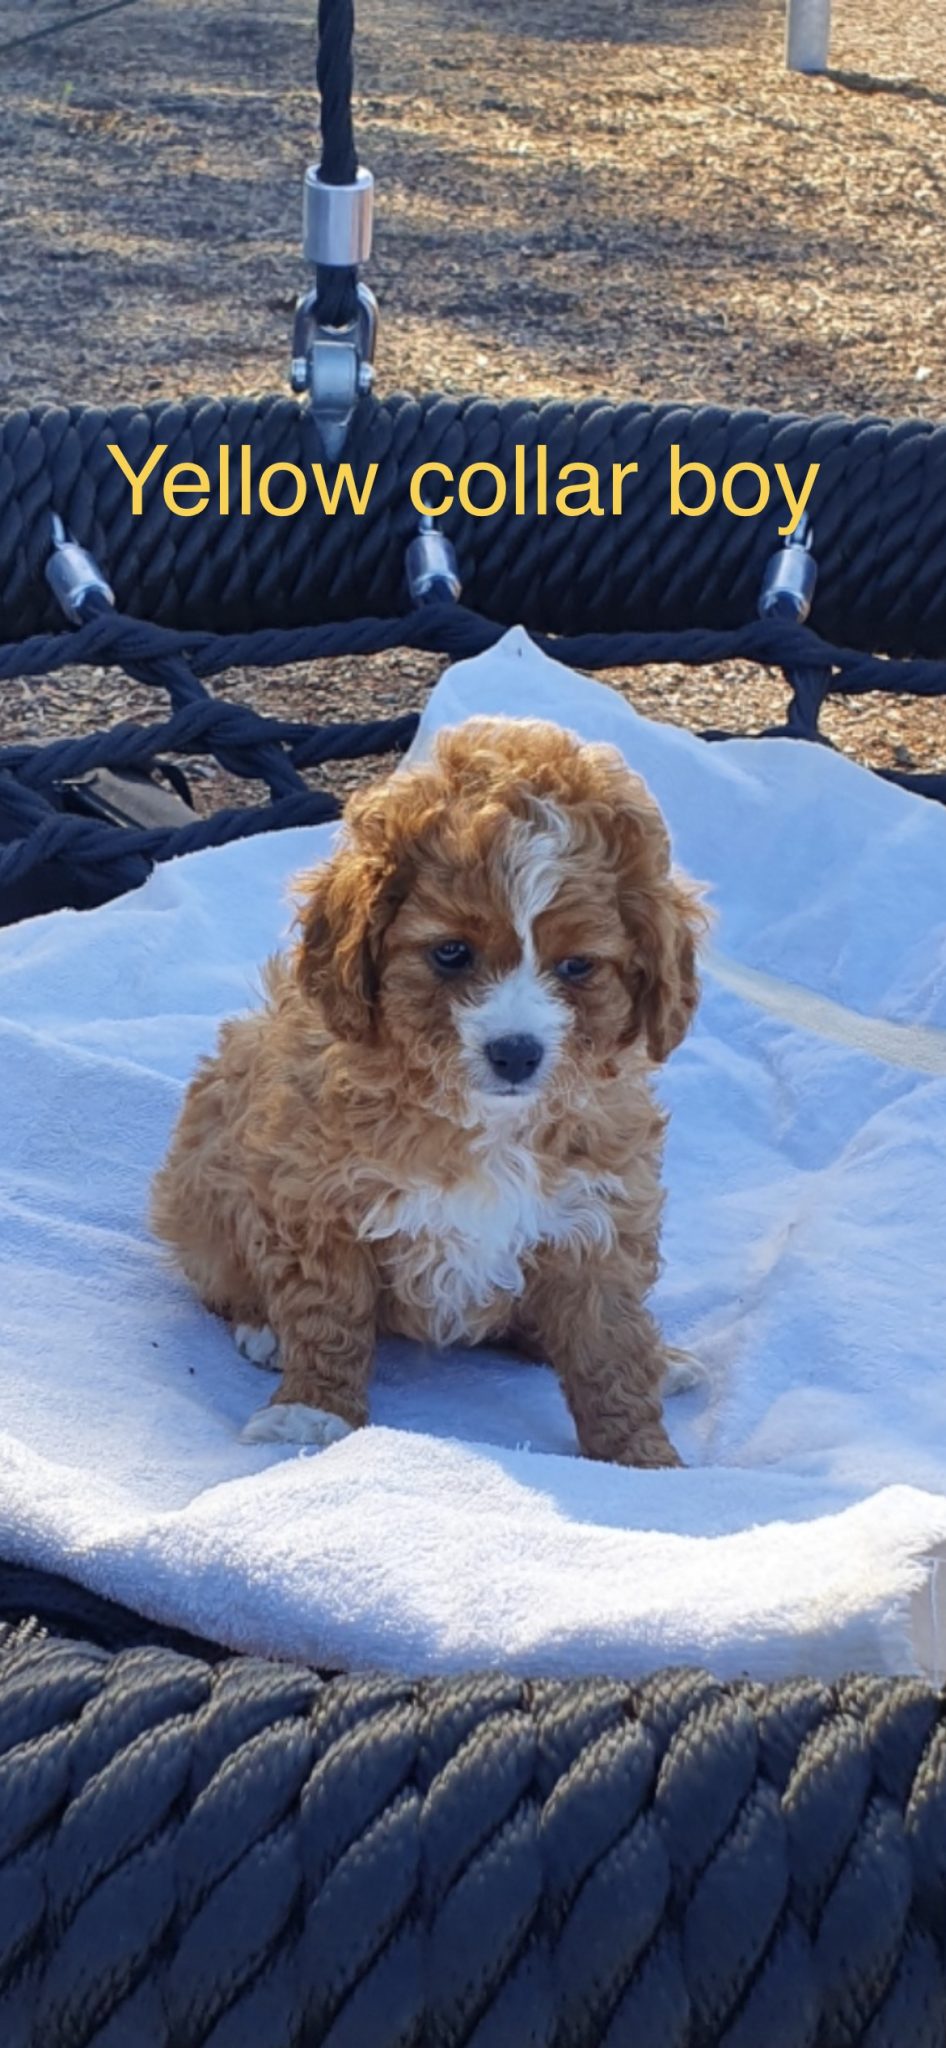 Toy Cavoodle puppy’s